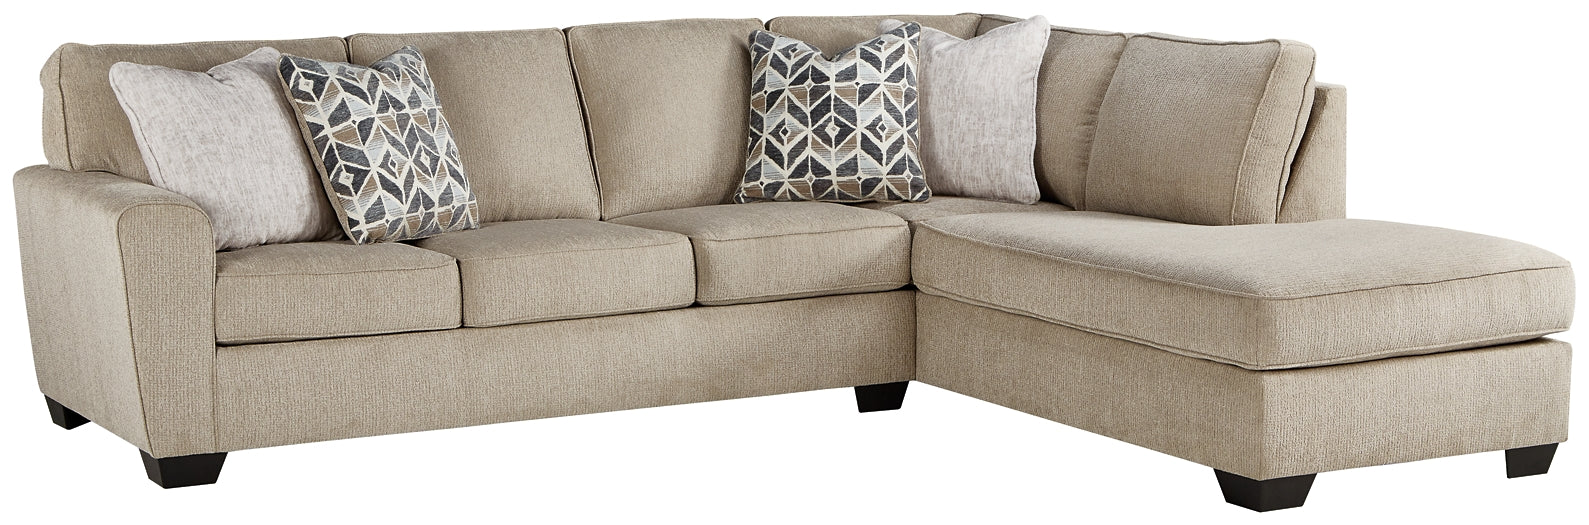 Decelle 2-Piece Sectional with Chaise at Cloud 9 Mattress & Furniture furniture, home furnishing, home decor